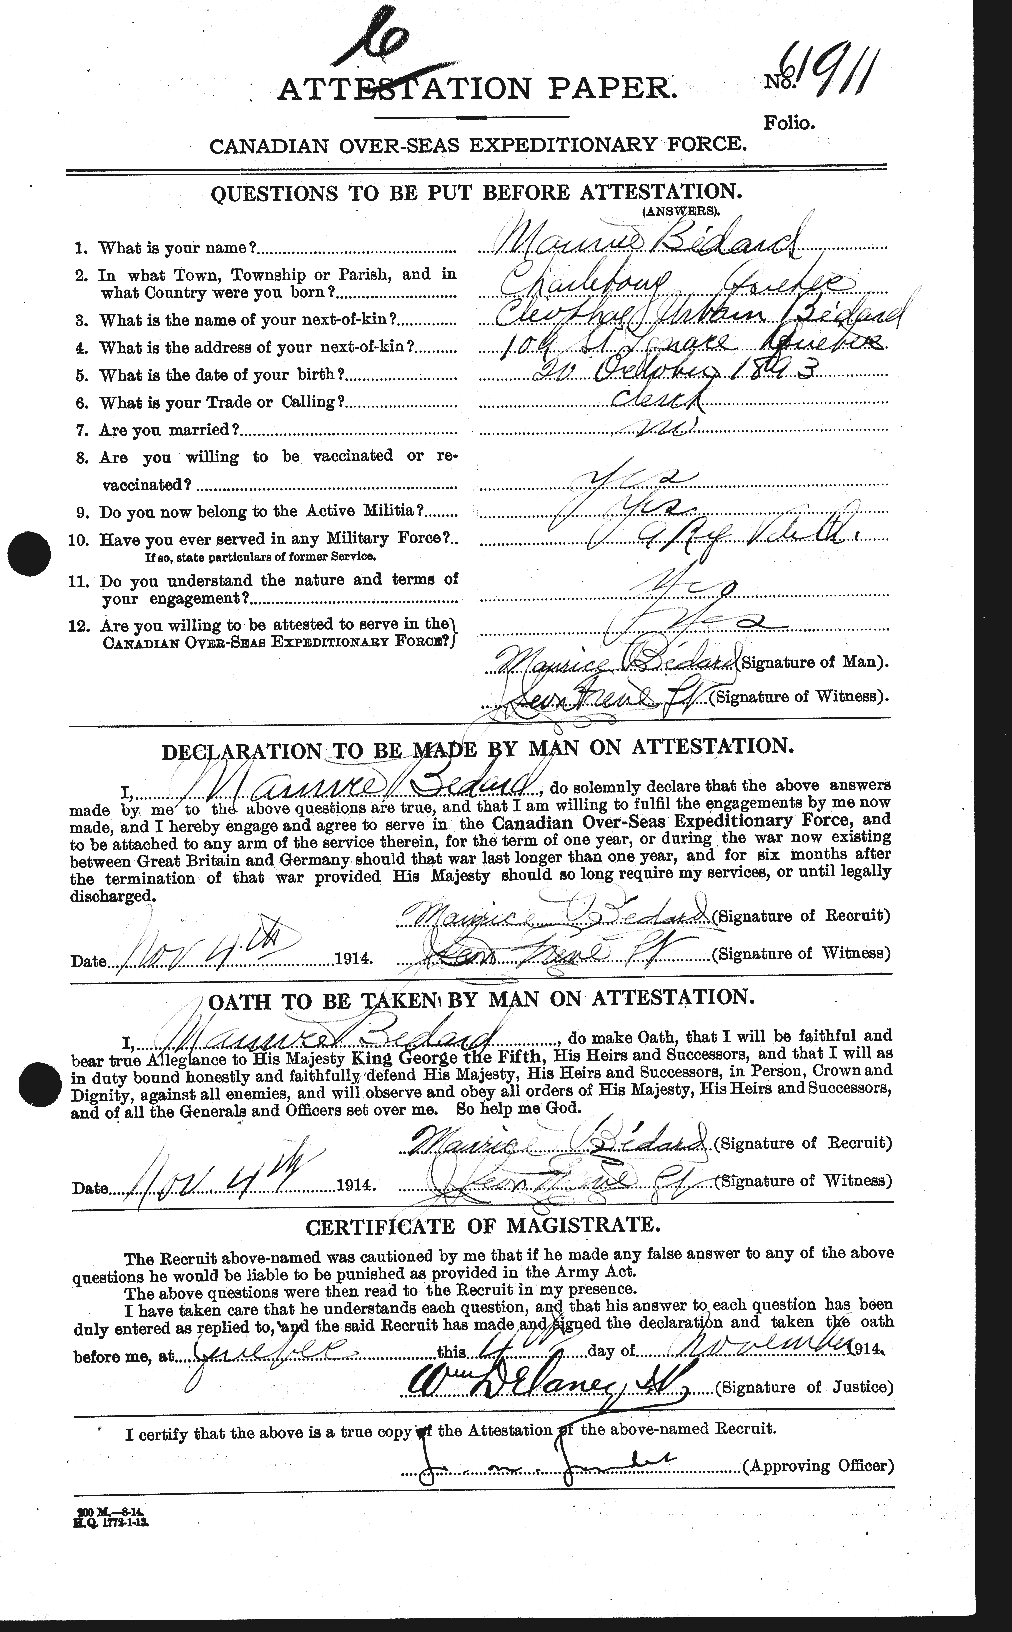 Personnel Records of the First World War - CEF 236065a